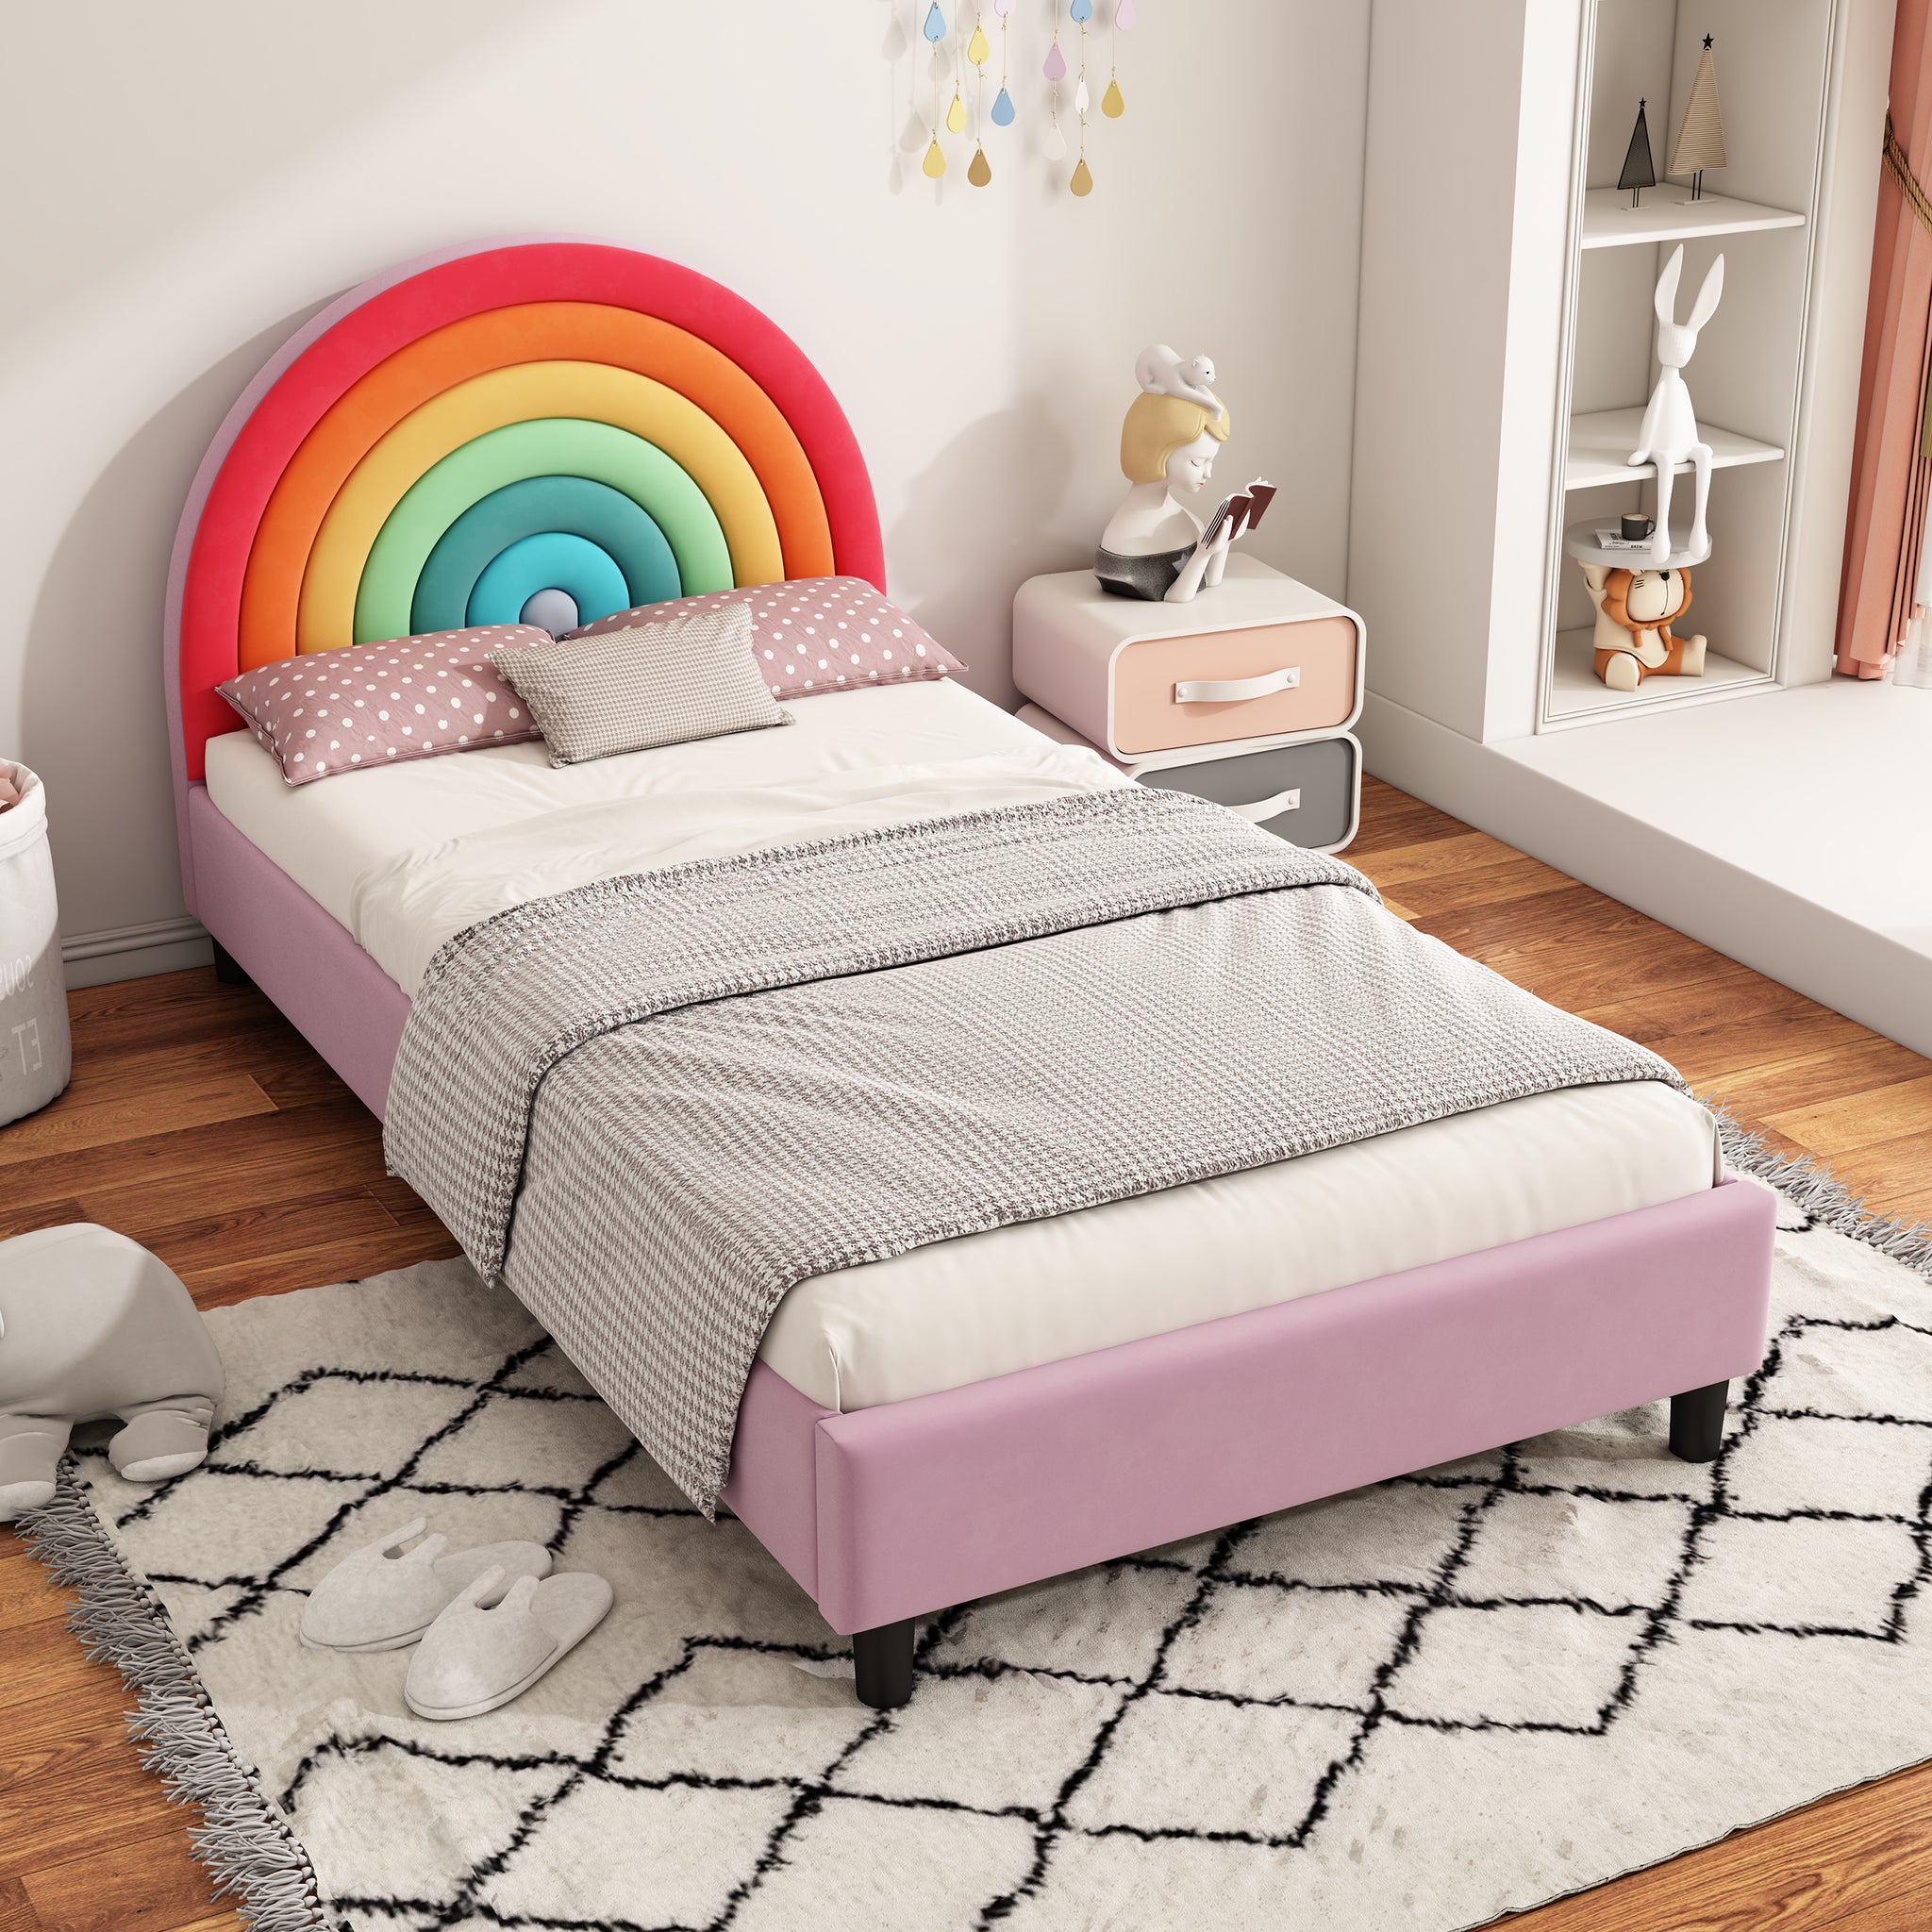 Rainbow Design Upholstered Twin Platform Bed Cute box spring not required-twin-colorful-wood-bed